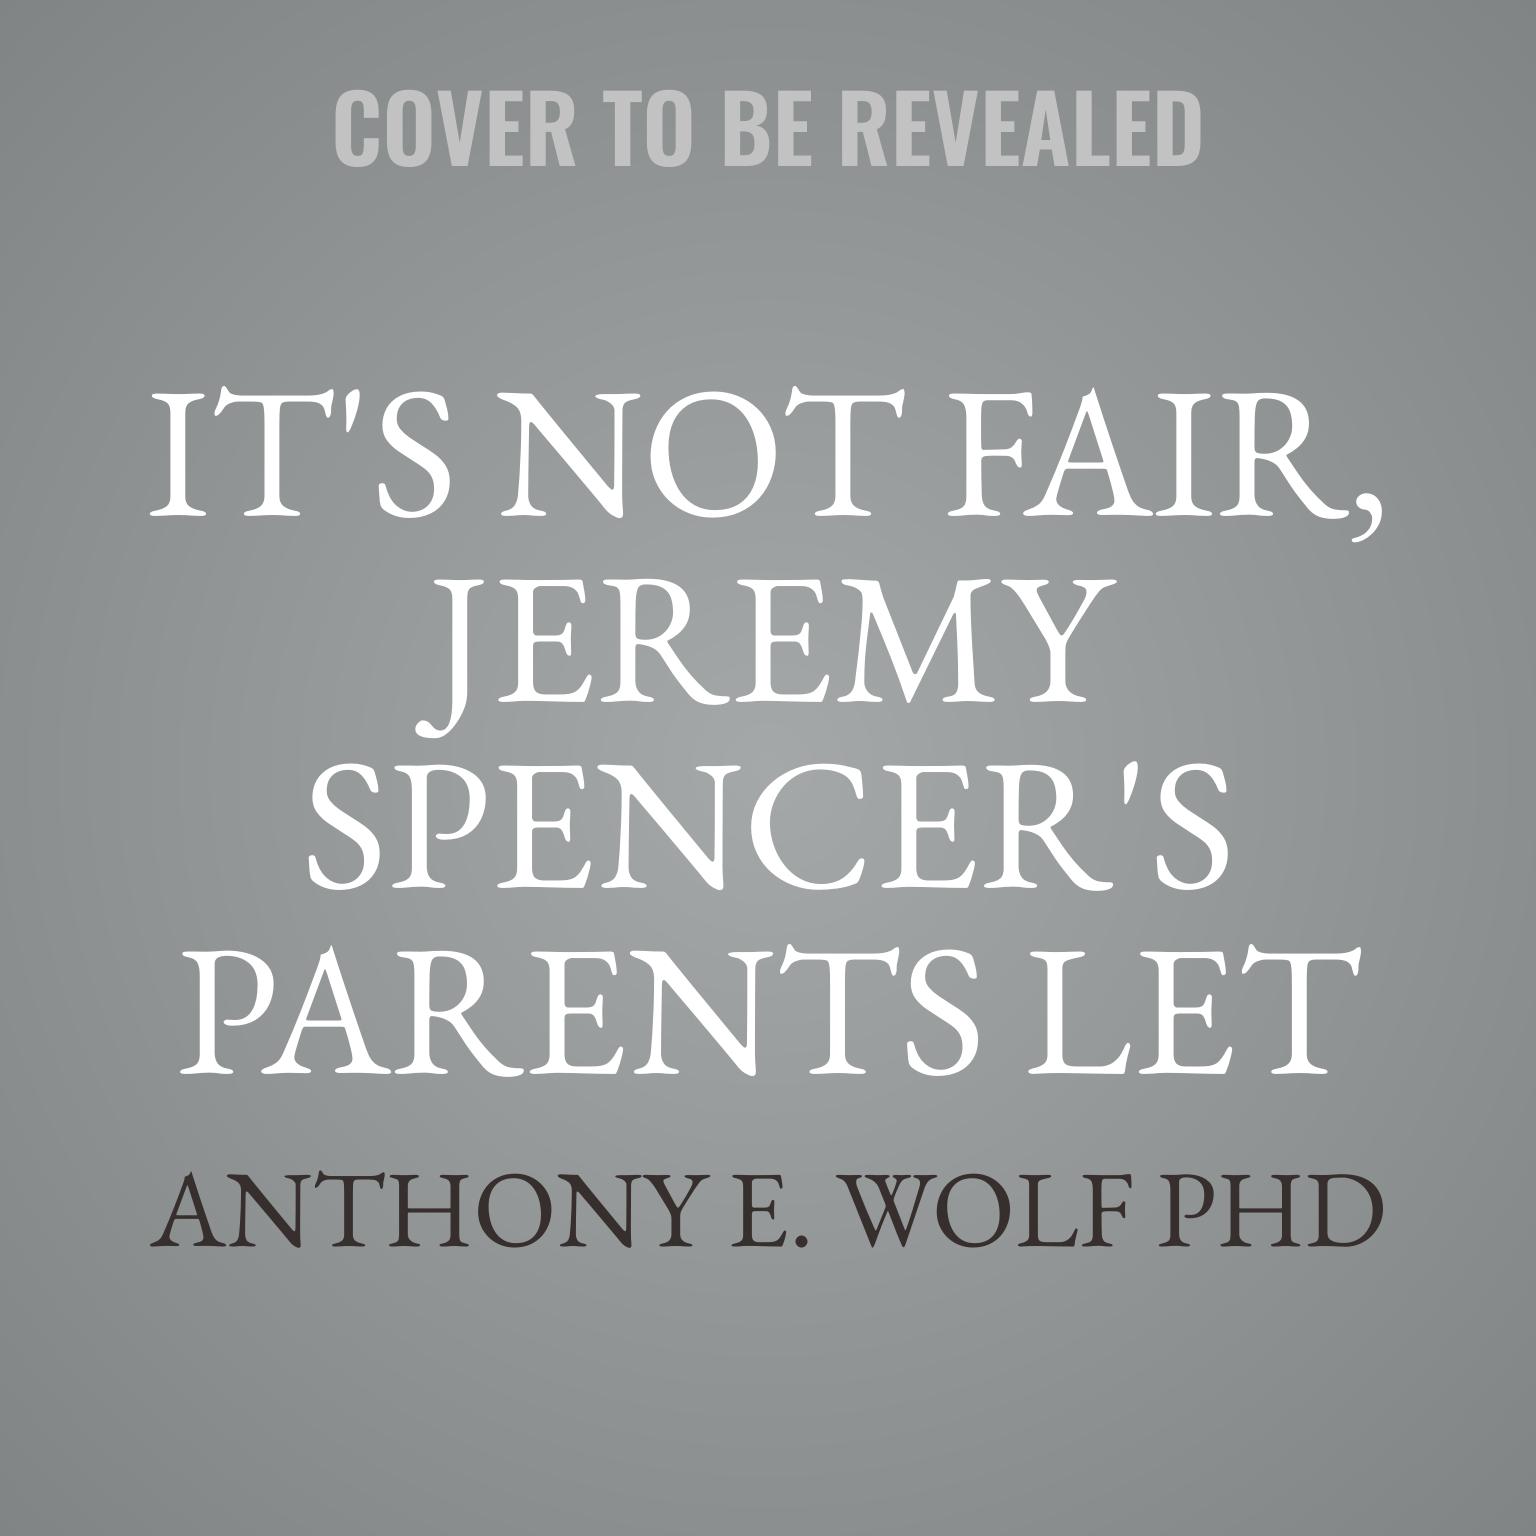 Its Not Fair, Jeremy Spencers Parents Let Him Stay Up All Night!: A Guide to the Tougher Parts of Parenting Audiobook, by Anthony E. Wolf